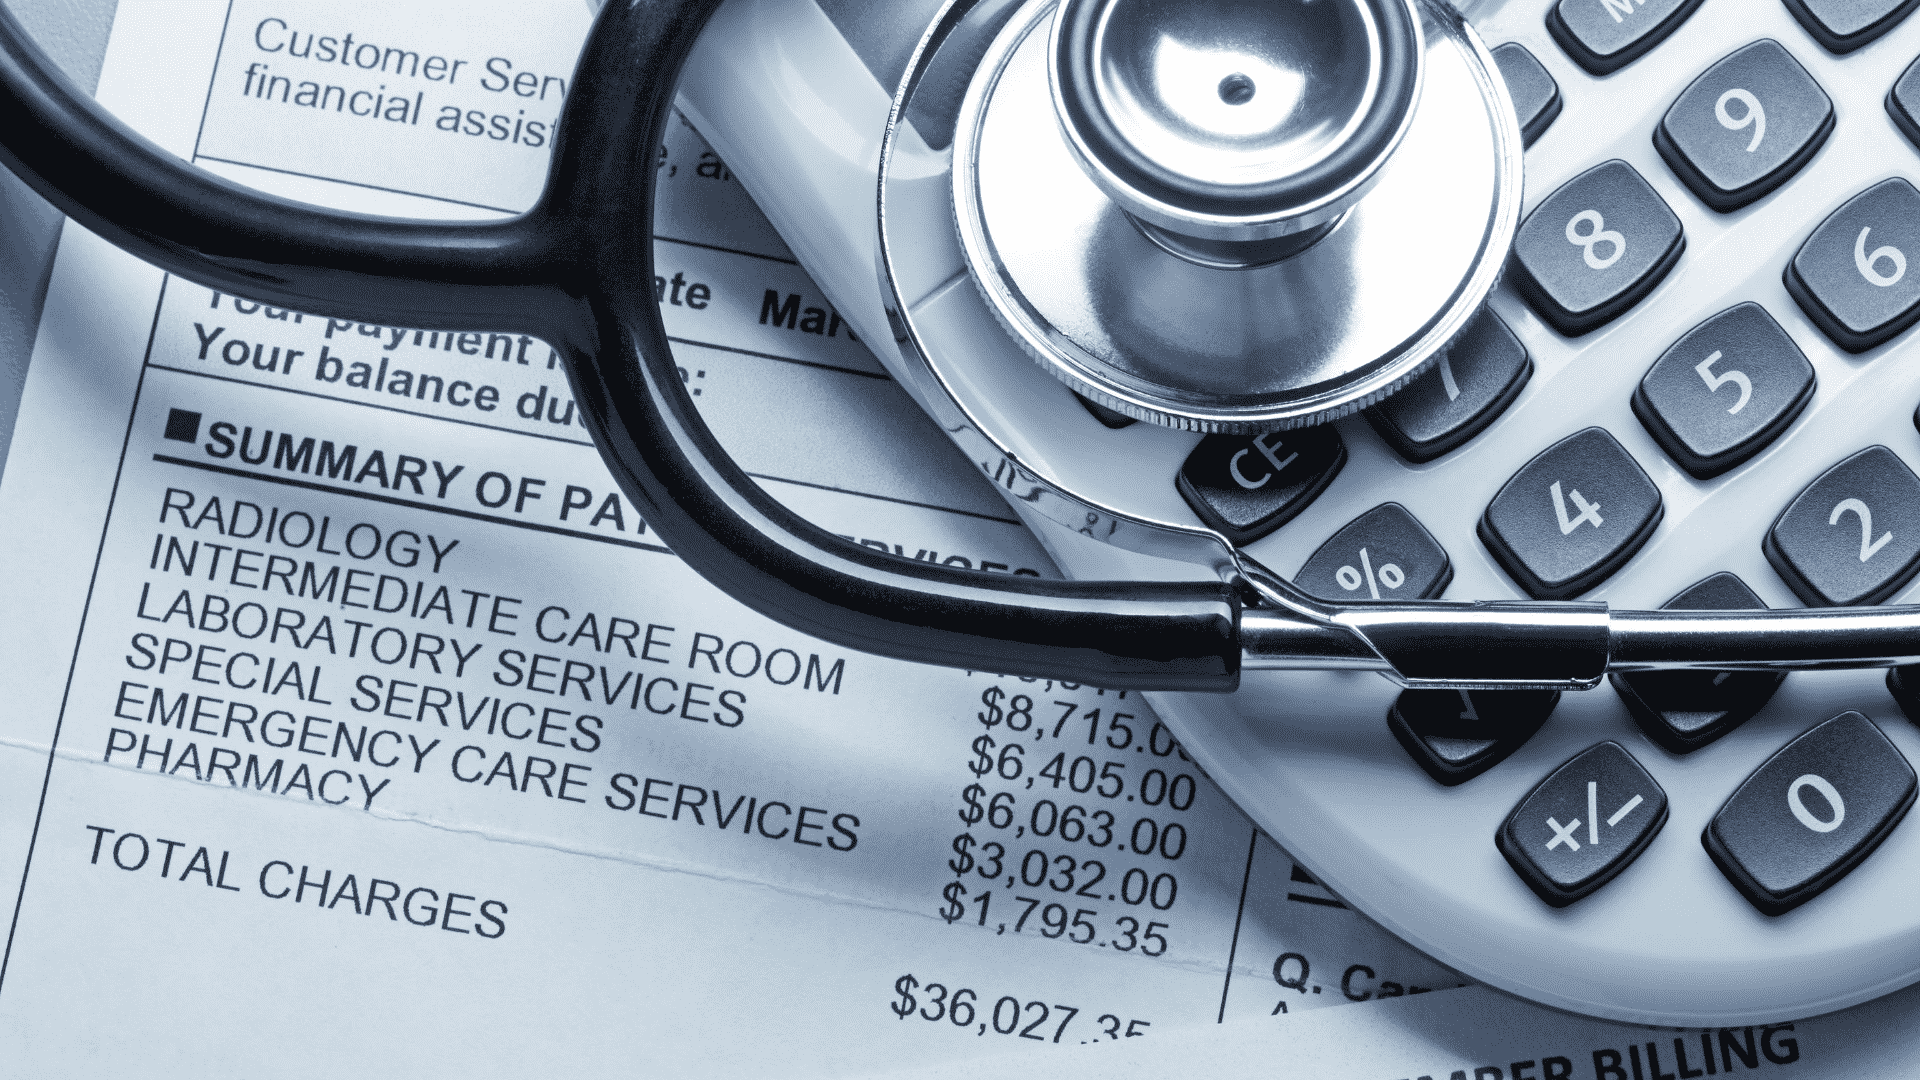 New-to-Practice Physicians: Your Tax & Accounting Questions Answered.